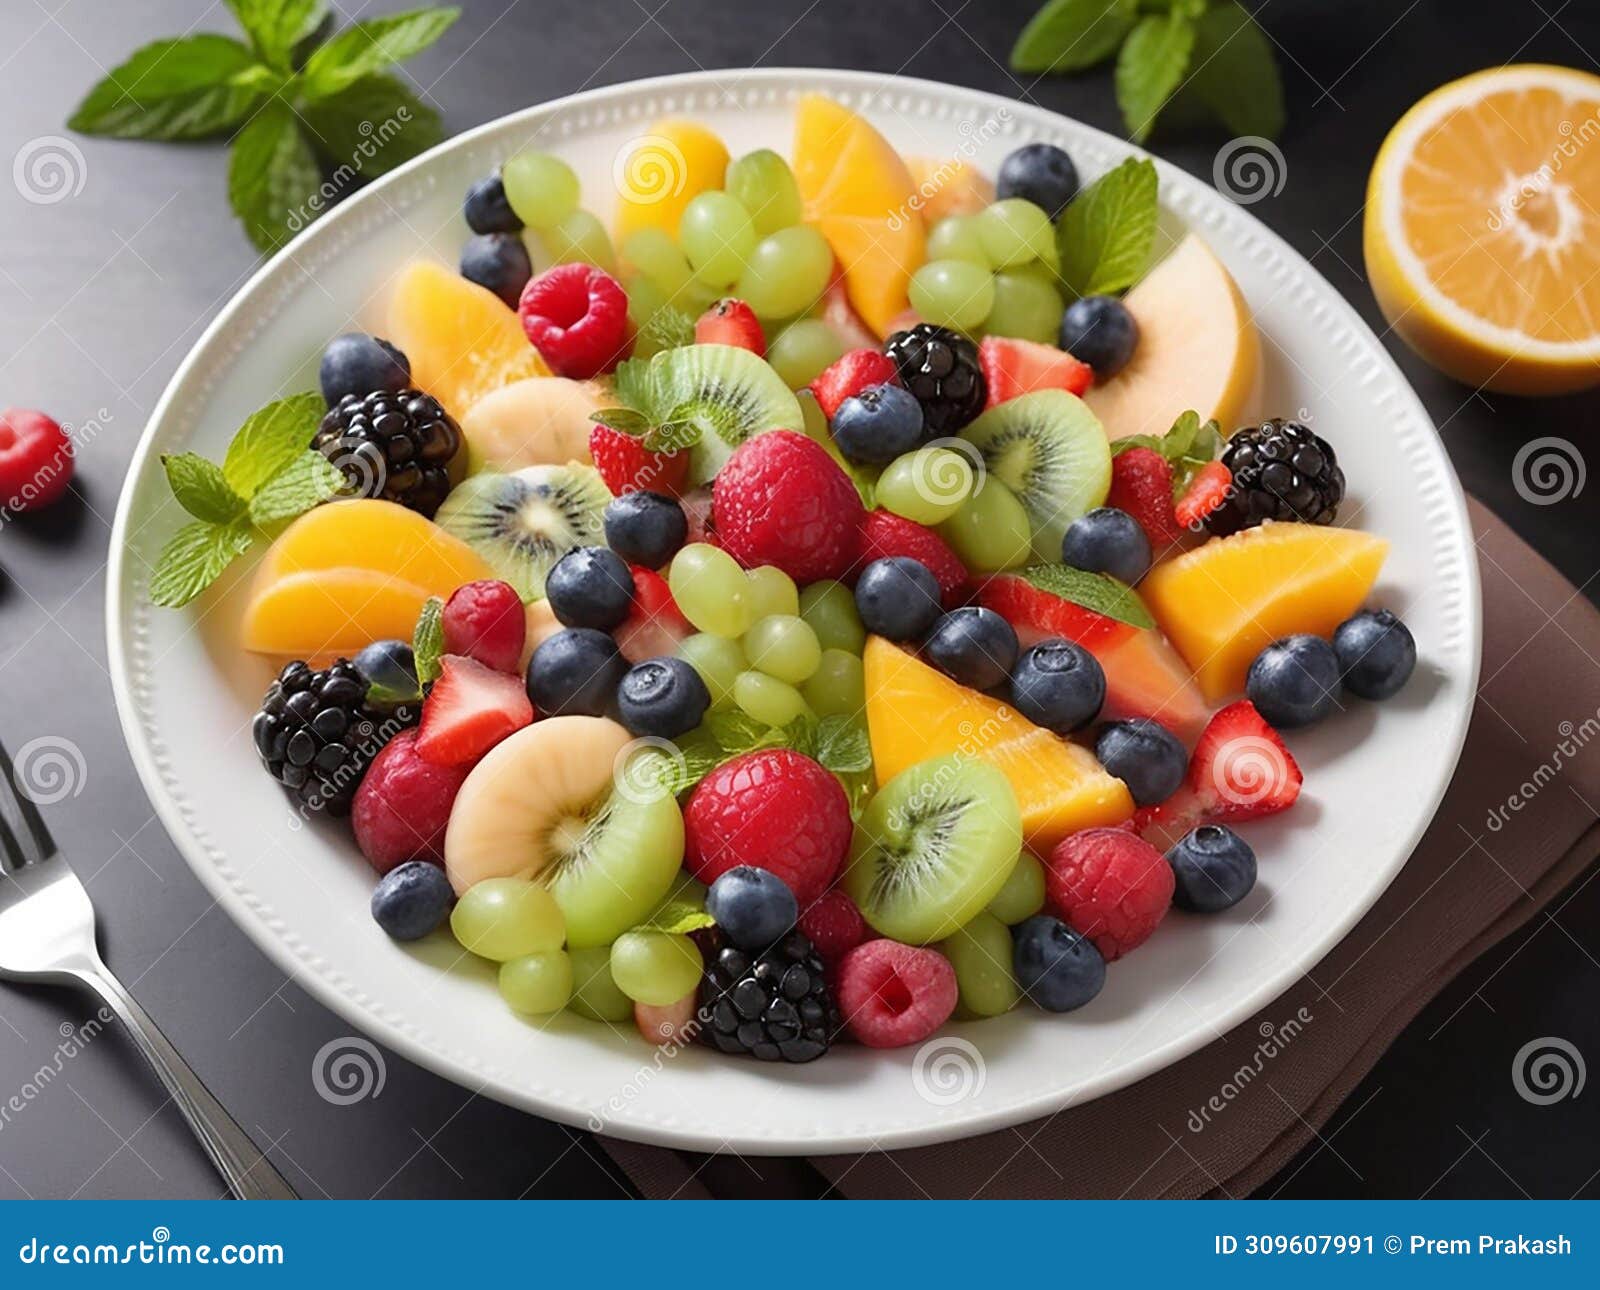 harmony of flavors: professionally styled fruit salad for epicurean delight